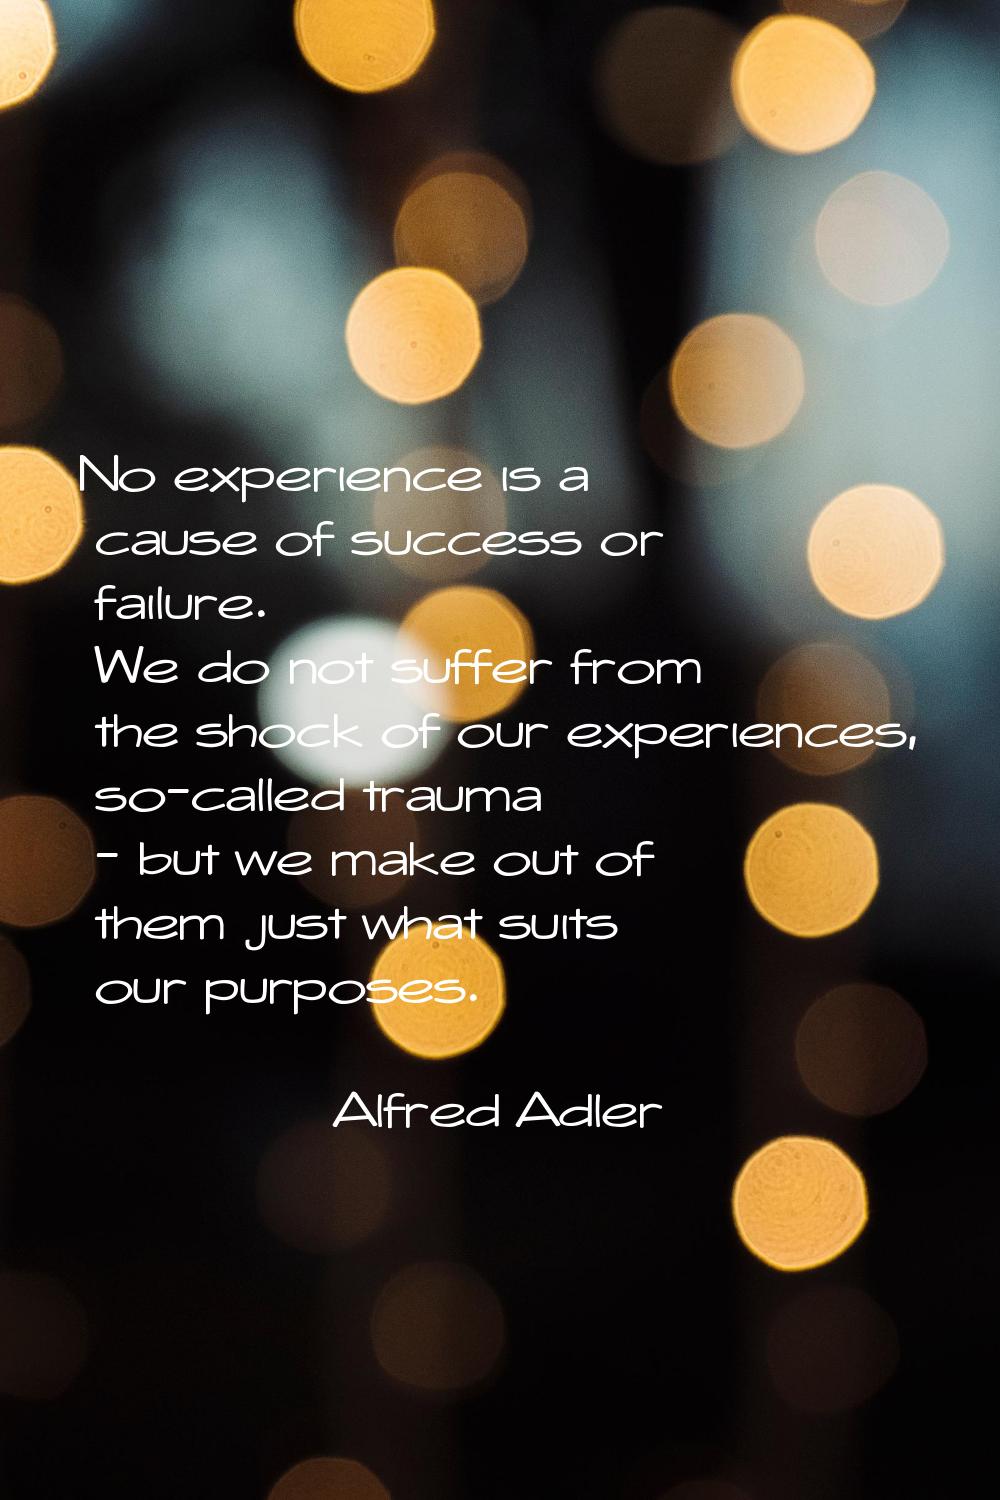 No experience is a cause of success or failure. We do not suffer from the shock of our experiences,